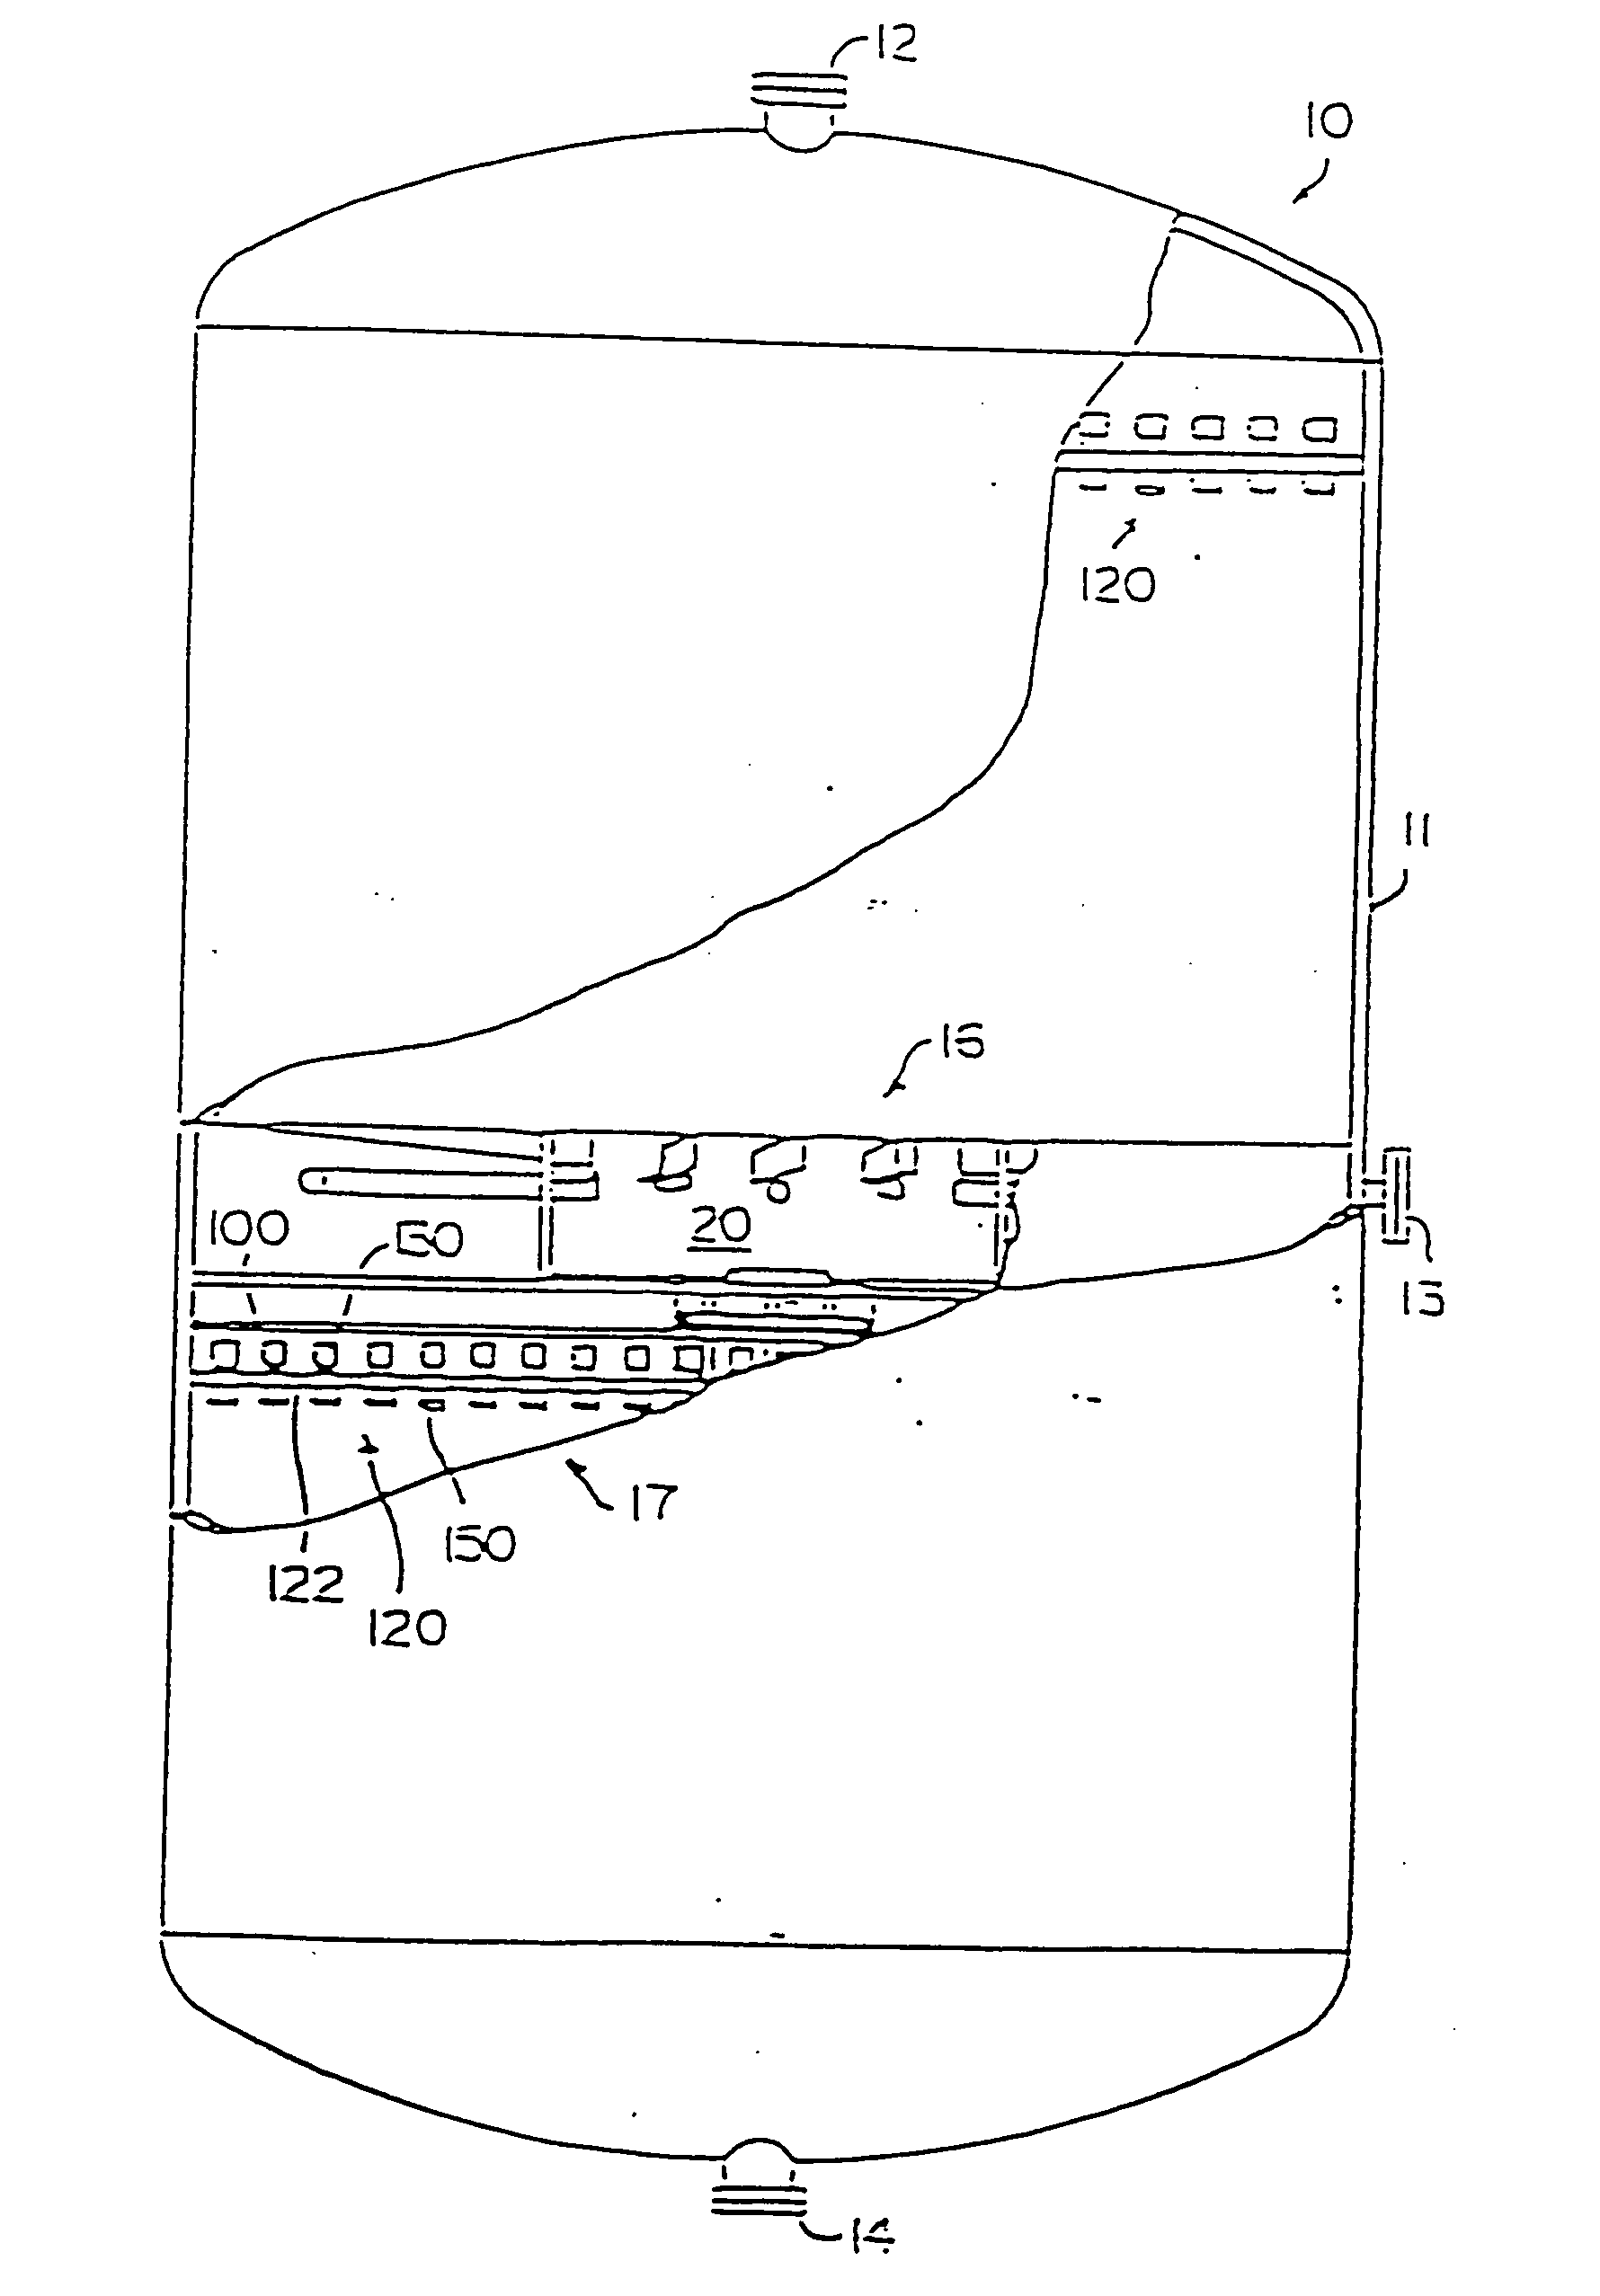 Reactordistribution apparatus and quench zone mixing apparatus